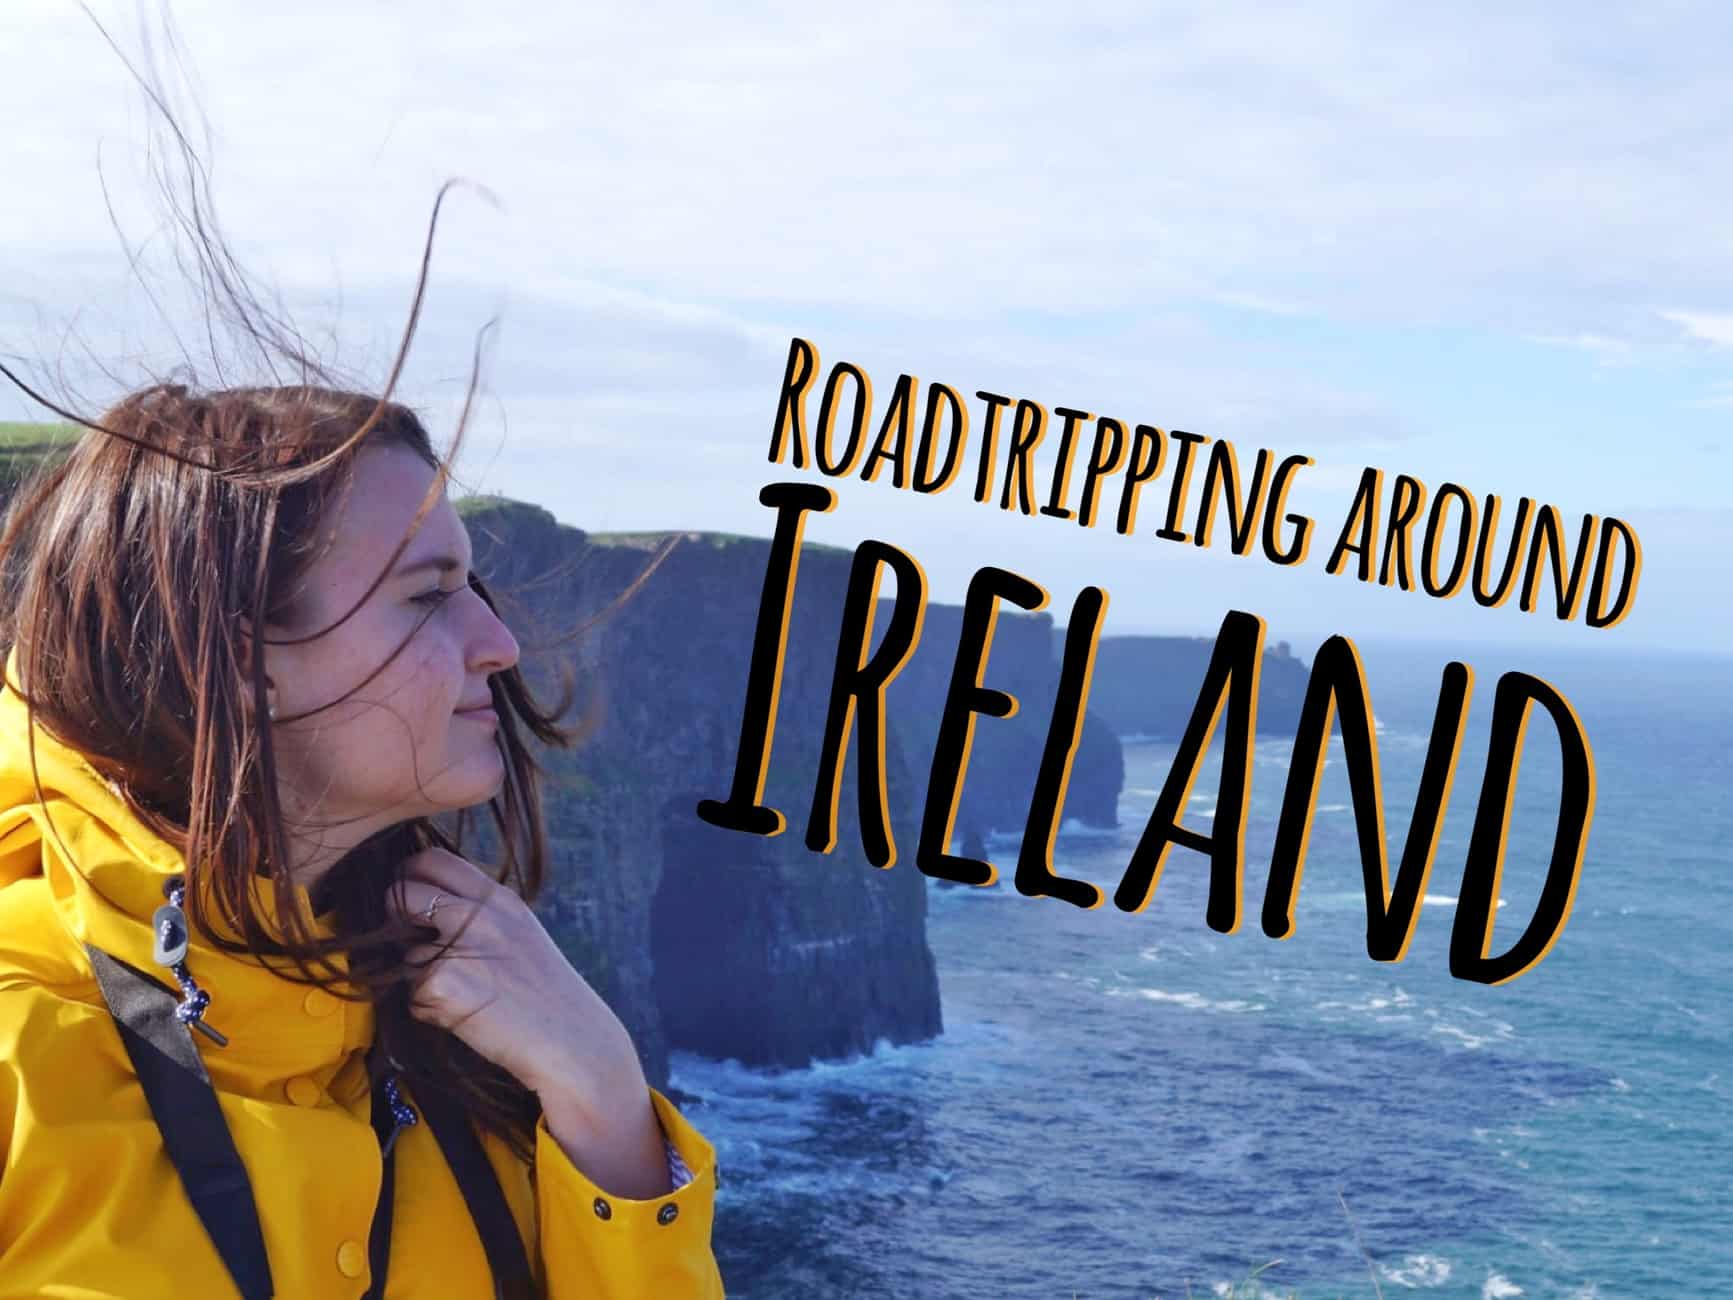 Weekend road trip around Ireland: Cliffs of Moher, Galway and Dublin